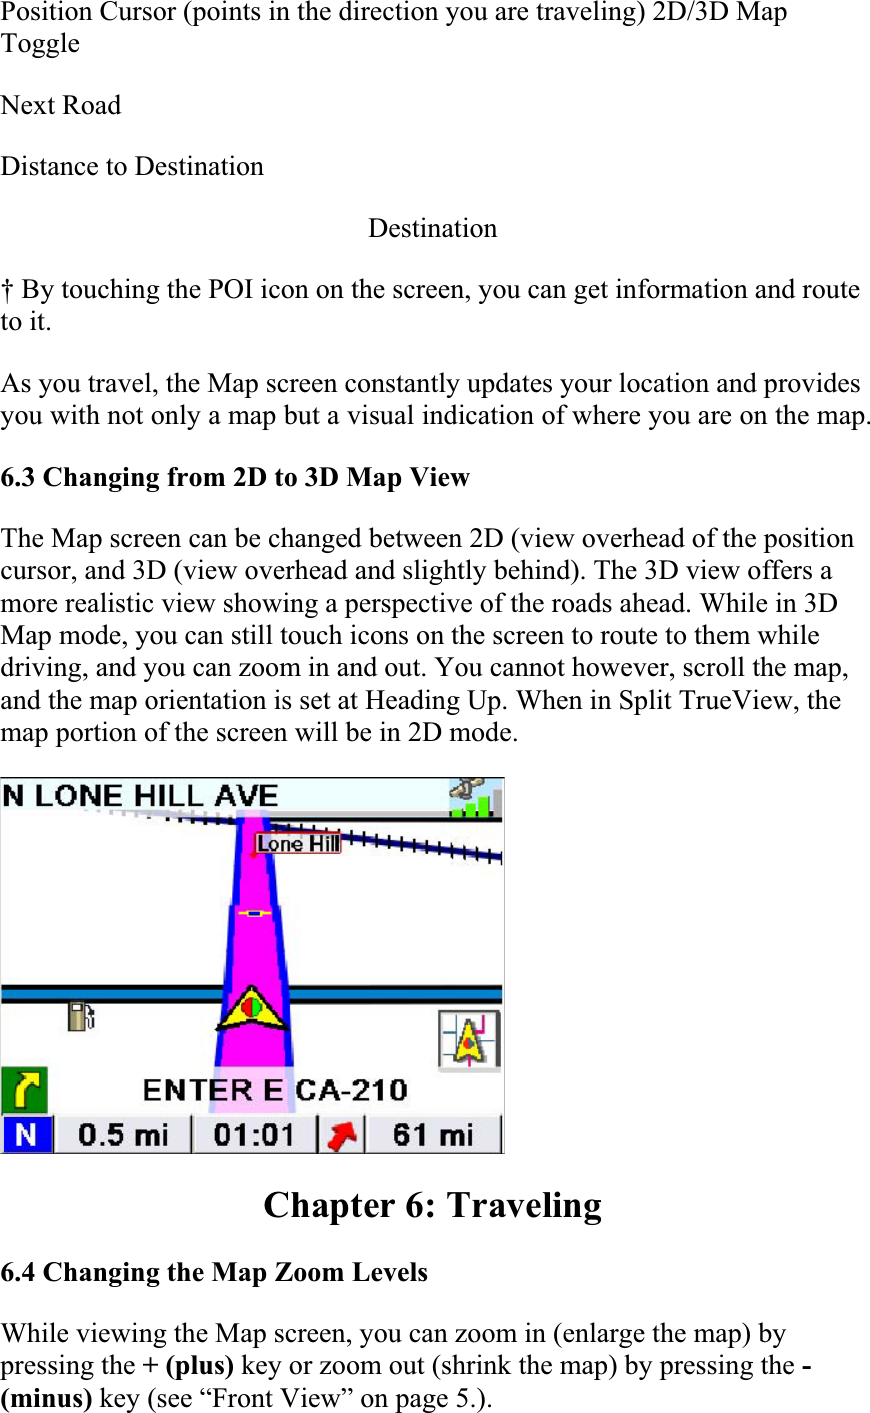 Position Cursor (points in the direction you are traveling) 2D/3D Map ToggleNext RoadDistance to Destination  Destination† By touching the POI icon on the screen, you can get information and route to it.As you travel, the Map screen constantly updates your location and provides you with not only a map but a visual indication of where you are on the map.  6.3 Changing from 2D to 3D Map ViewThe Map screen can be changed between 2D (view overhead of the position cursor, and 3D (view overhead and slightly behind). The 3D view offers a more realistic view showing a perspective of the roads ahead. While in 3D Map mode, you can still touch icons on the screen to route to them while driving, and you can zoom in and out. You cannot however, scroll the map, and the map orientation is set at Heading Up. When in Split TrueView, the map portion of the screen will be in 2D mode.  Chapter 6: Traveling 6.4 Changing the Map Zoom LevelsWhile viewing the Map screen, you can zoom in (enlarge the map) by pressing the + (plus) key or zoom out (shrink the map) by pressing the -(minus) key (see “Front View” on page 5.).  